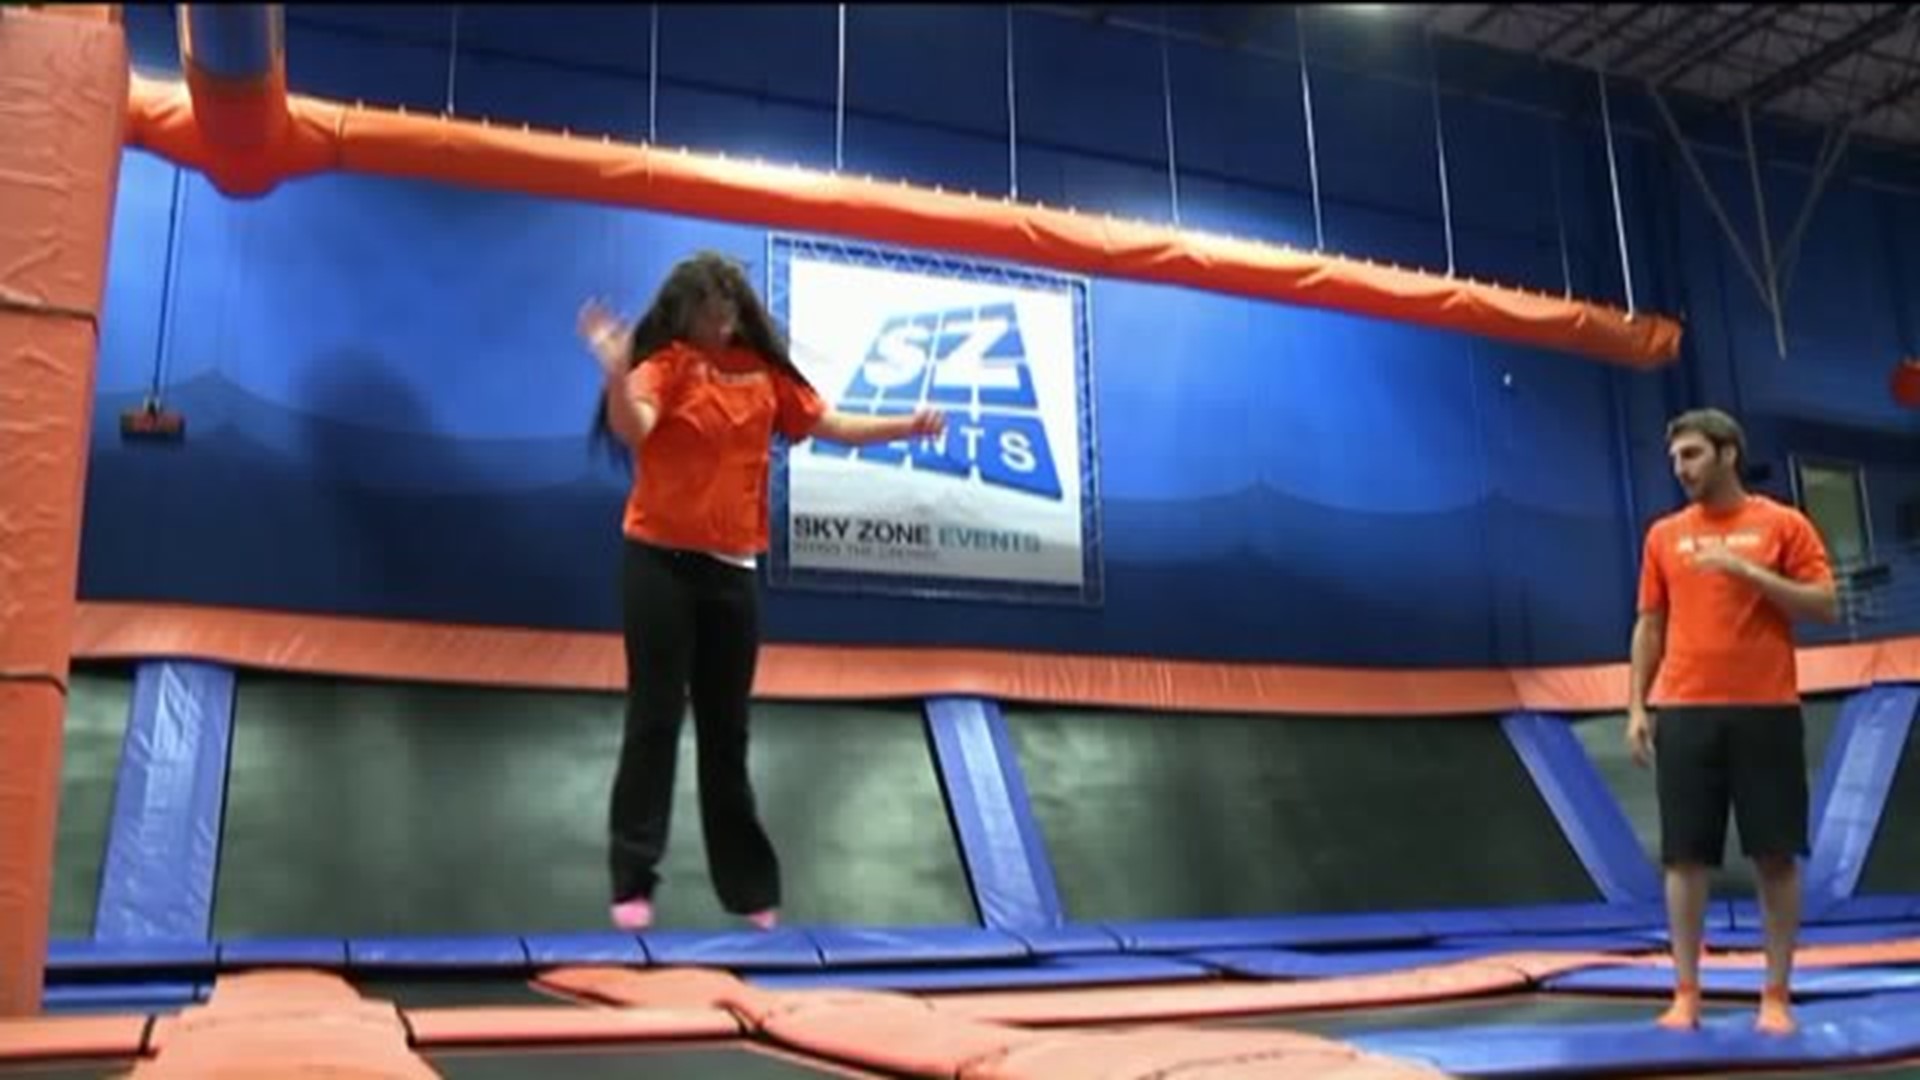 Sky Zone Scranton Leaves Some Walking Away With Sprains, Dislocations